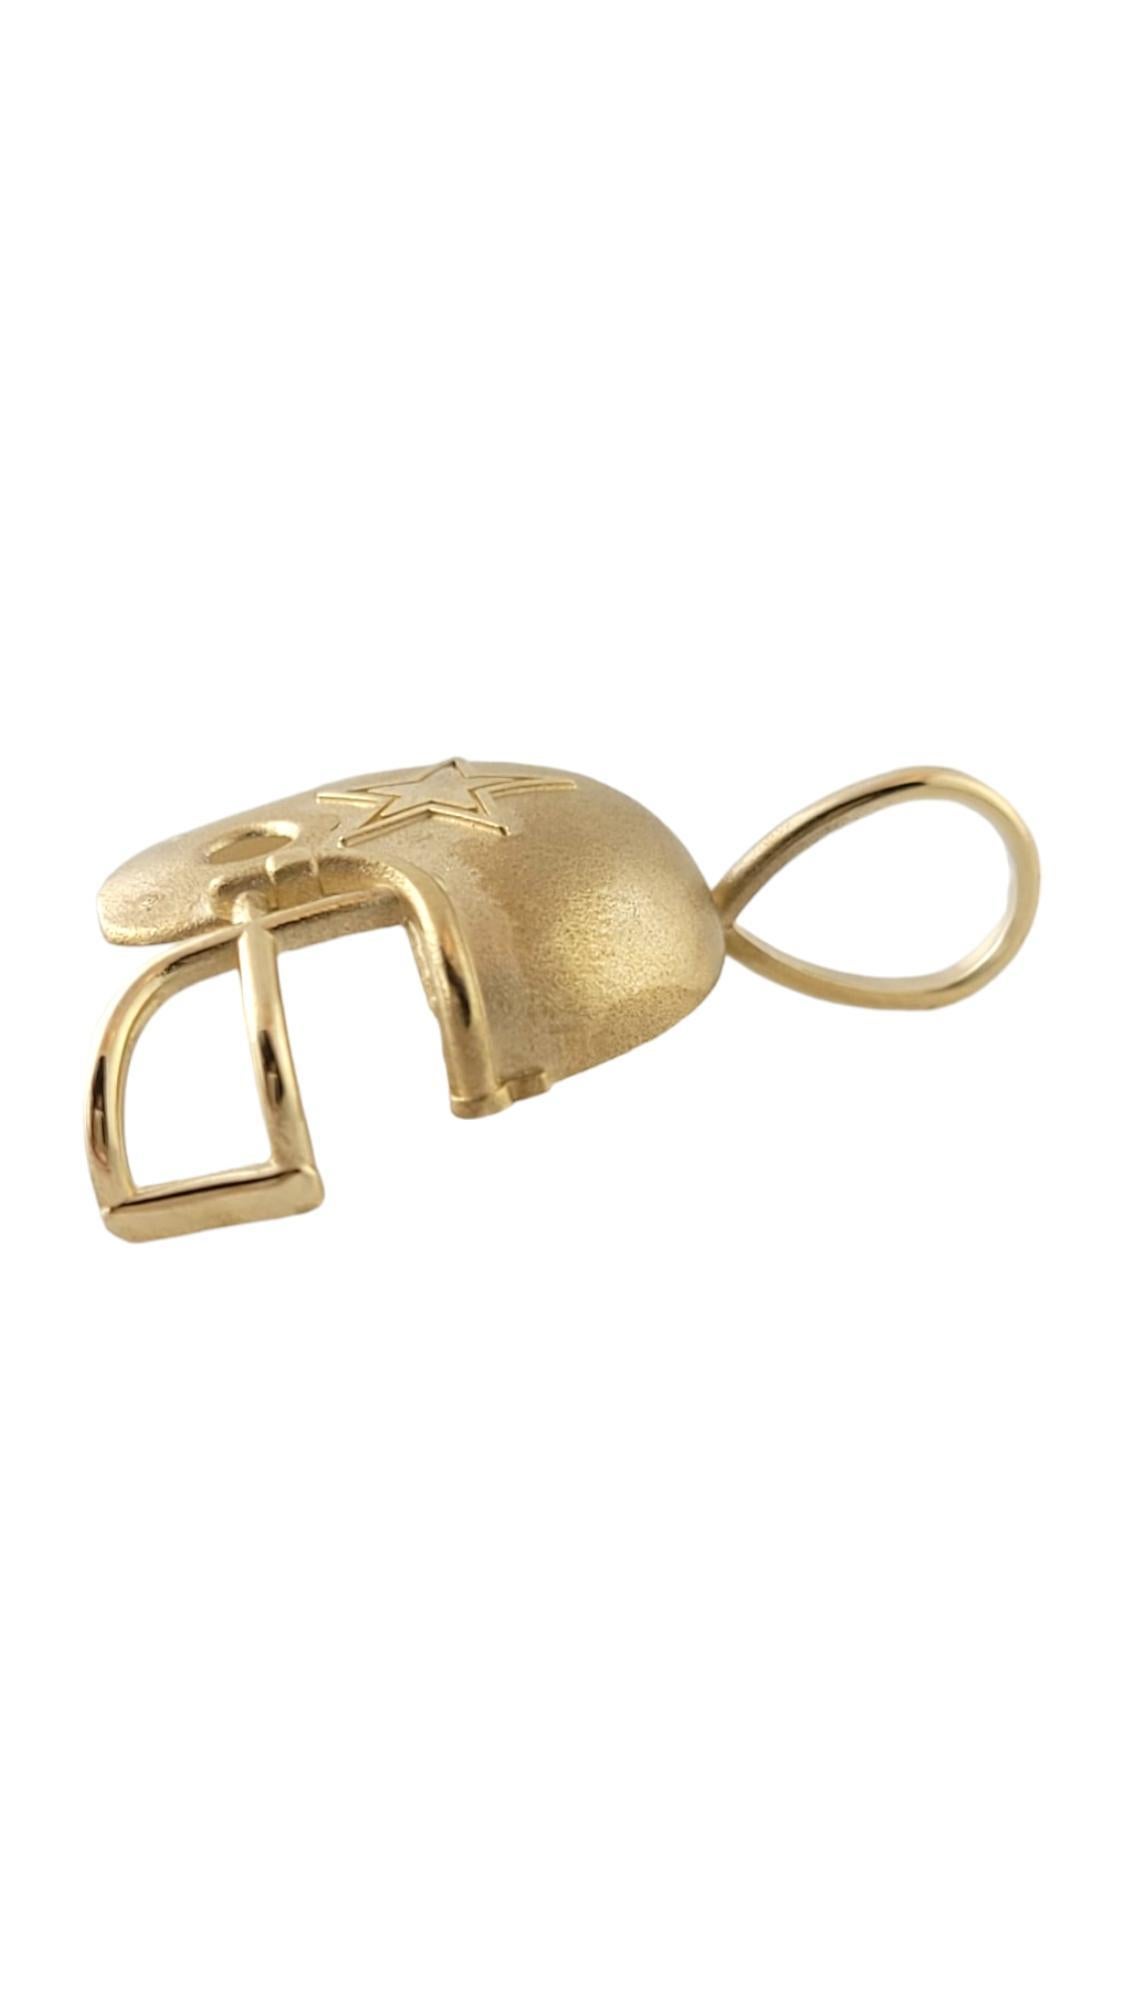 Vintage 14K Yellow Gold Dallas Cowboys Helmet Pendant
 
This beautifully detailed football helmet pendant is the perfect gift for a Cowboys fan in your life!

Size: 30.0mm X 21.0mm X 5.8mm

Weight: 1.6 dwt/ 2.4 g

Hallmark: TM C 1994 NFLP. 14K